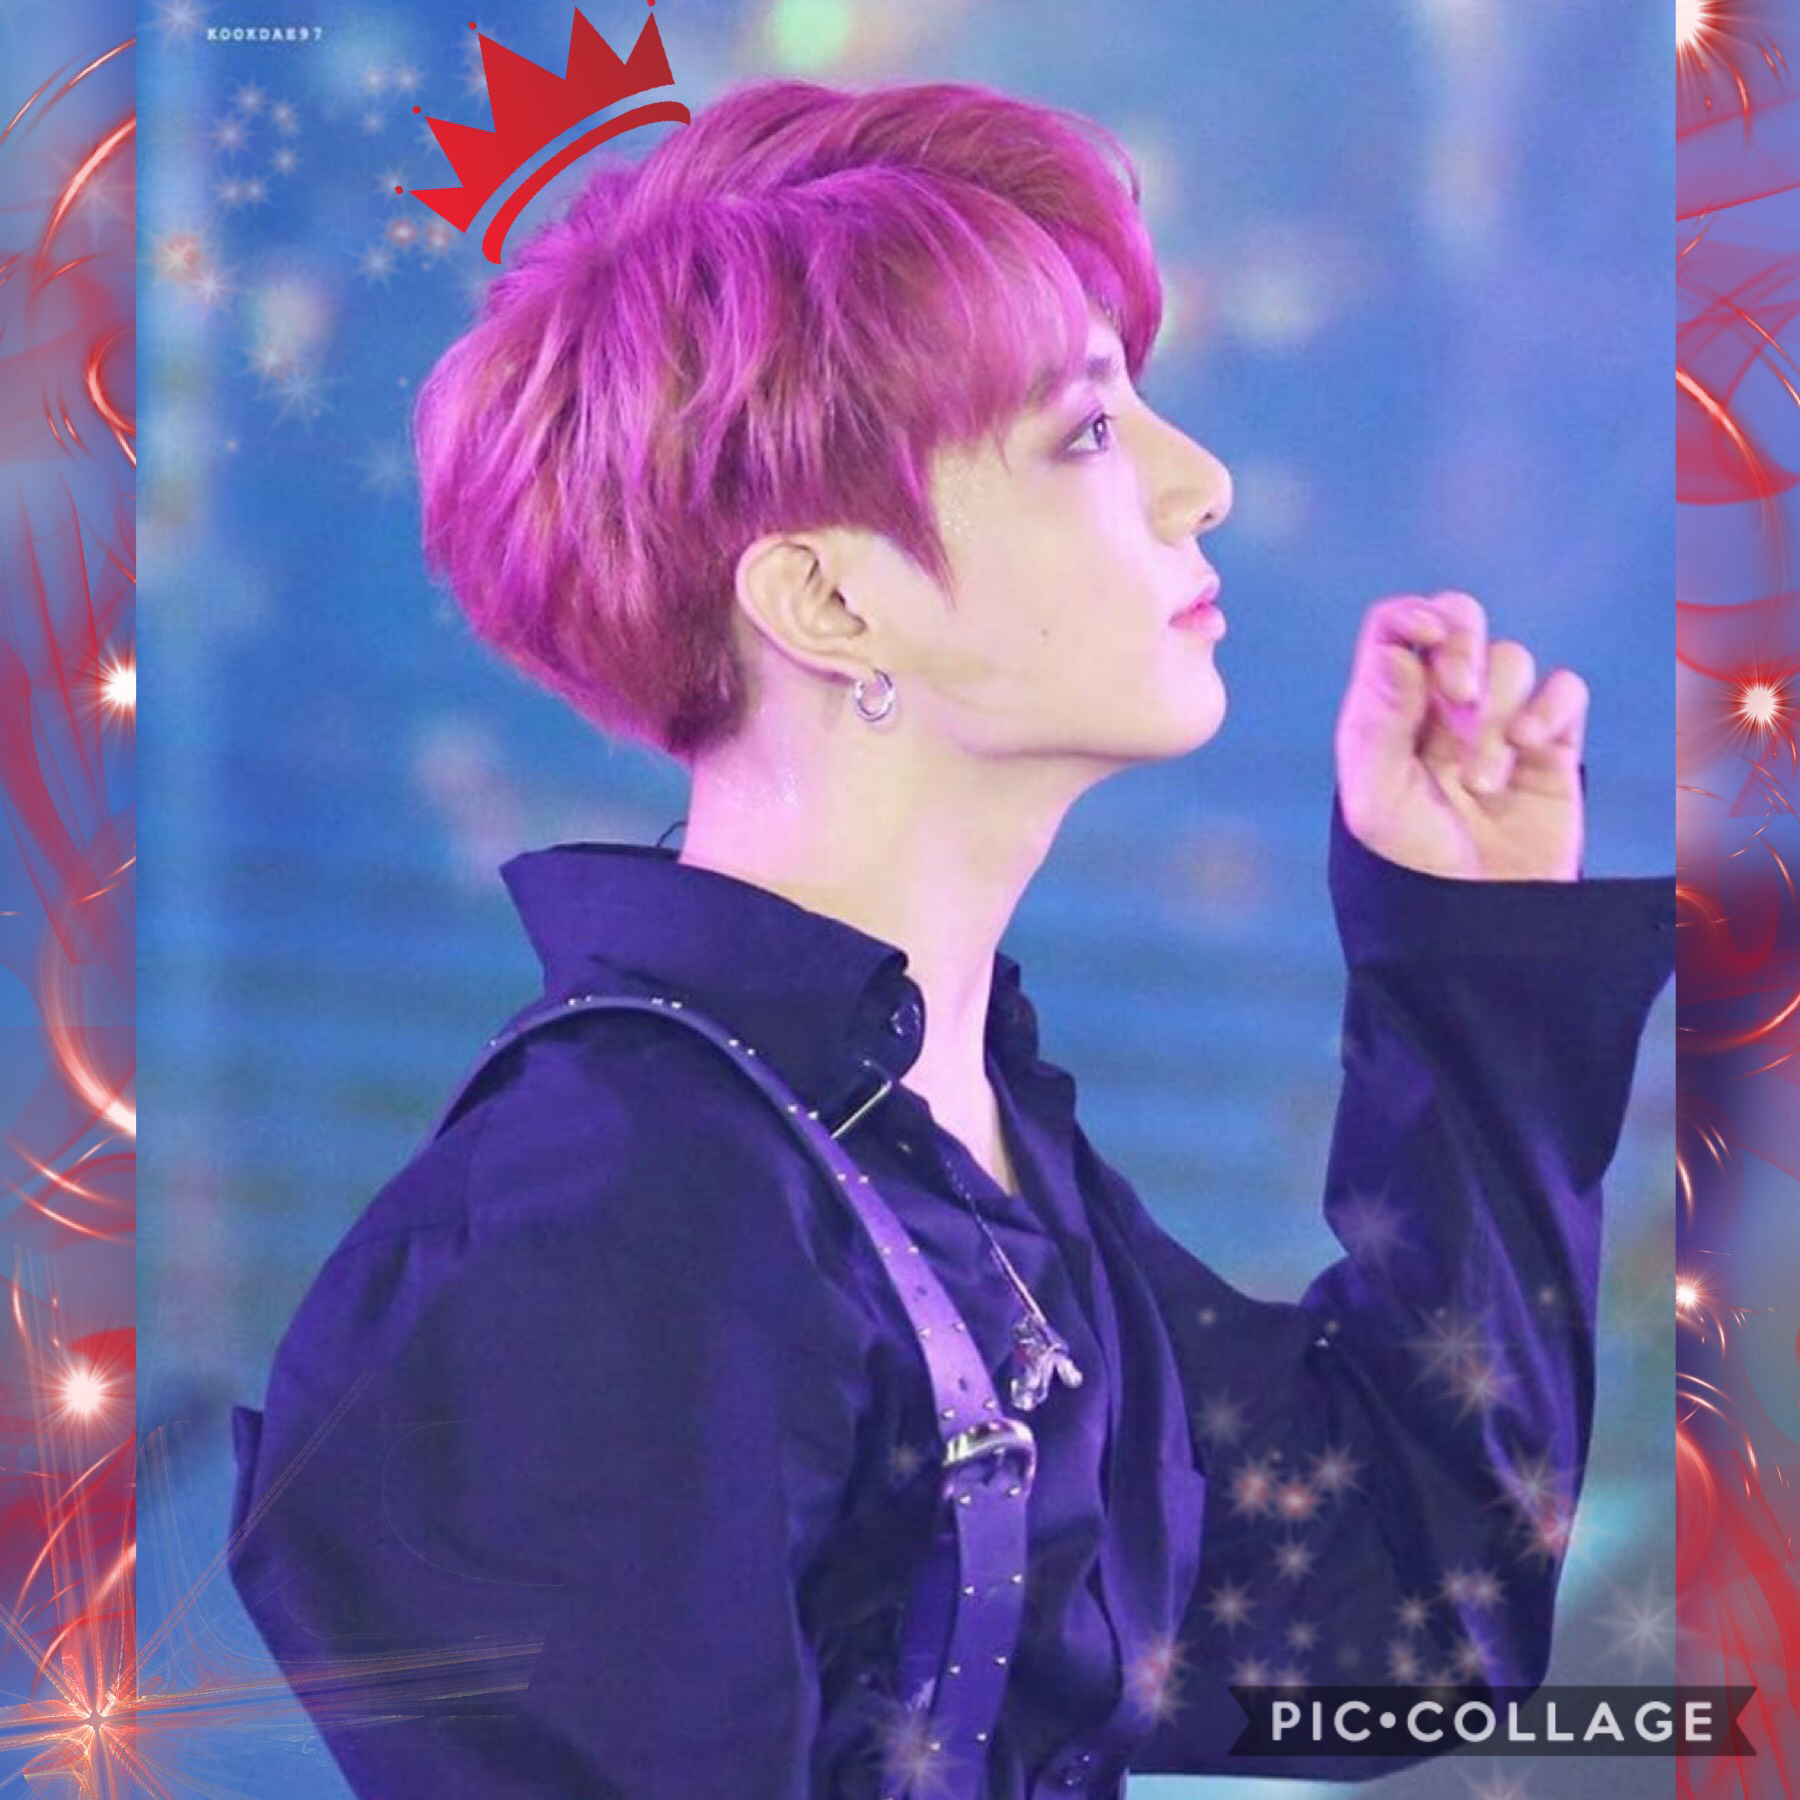 ♥️TAP♥️
Omg I still can’t believe that they changed their hair color!! Omg this red of Jungkook it’s so beautiful but it’s also pink? I don’t know I just know he looks so hot with it ❤️🔥 lol 